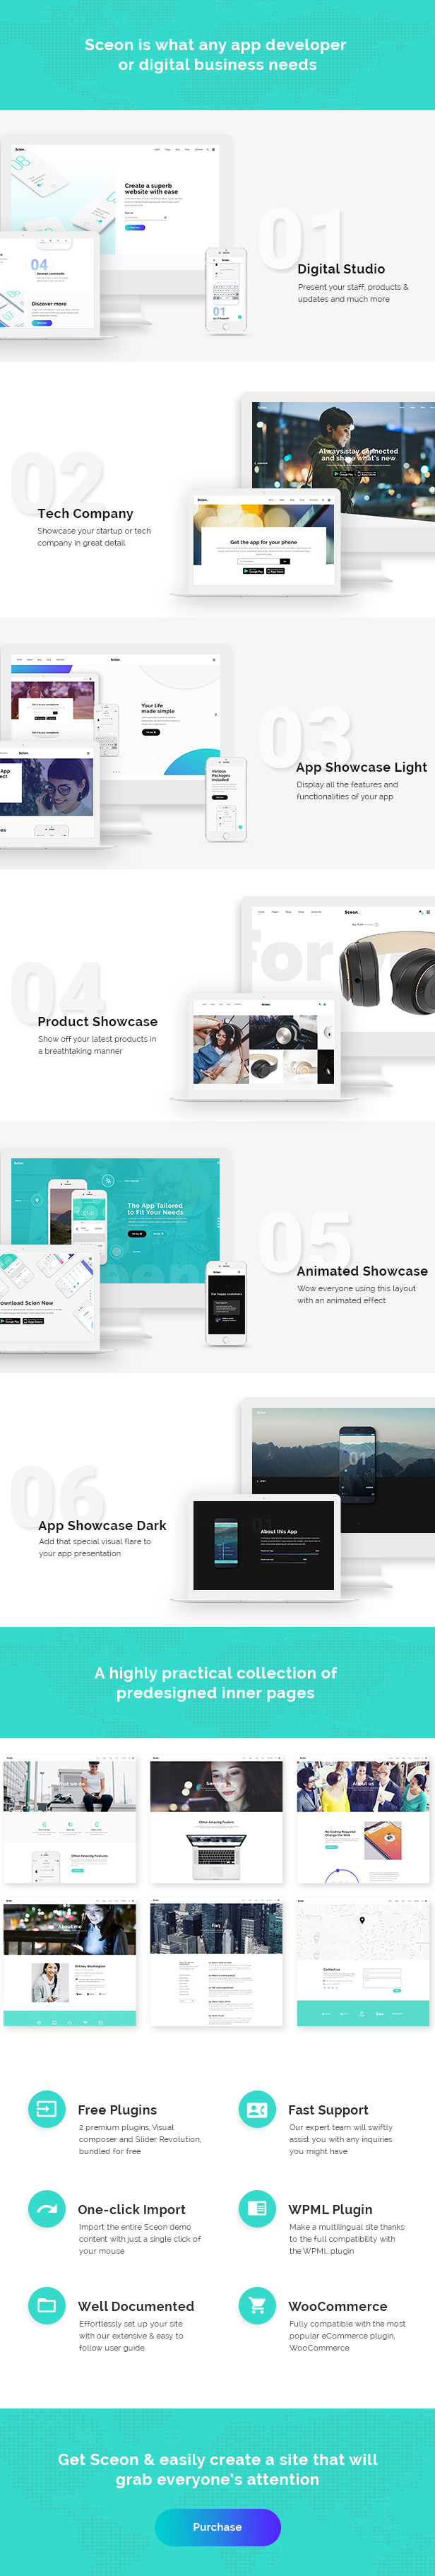 Sceon - App Landing Page & Startup Theme - 1